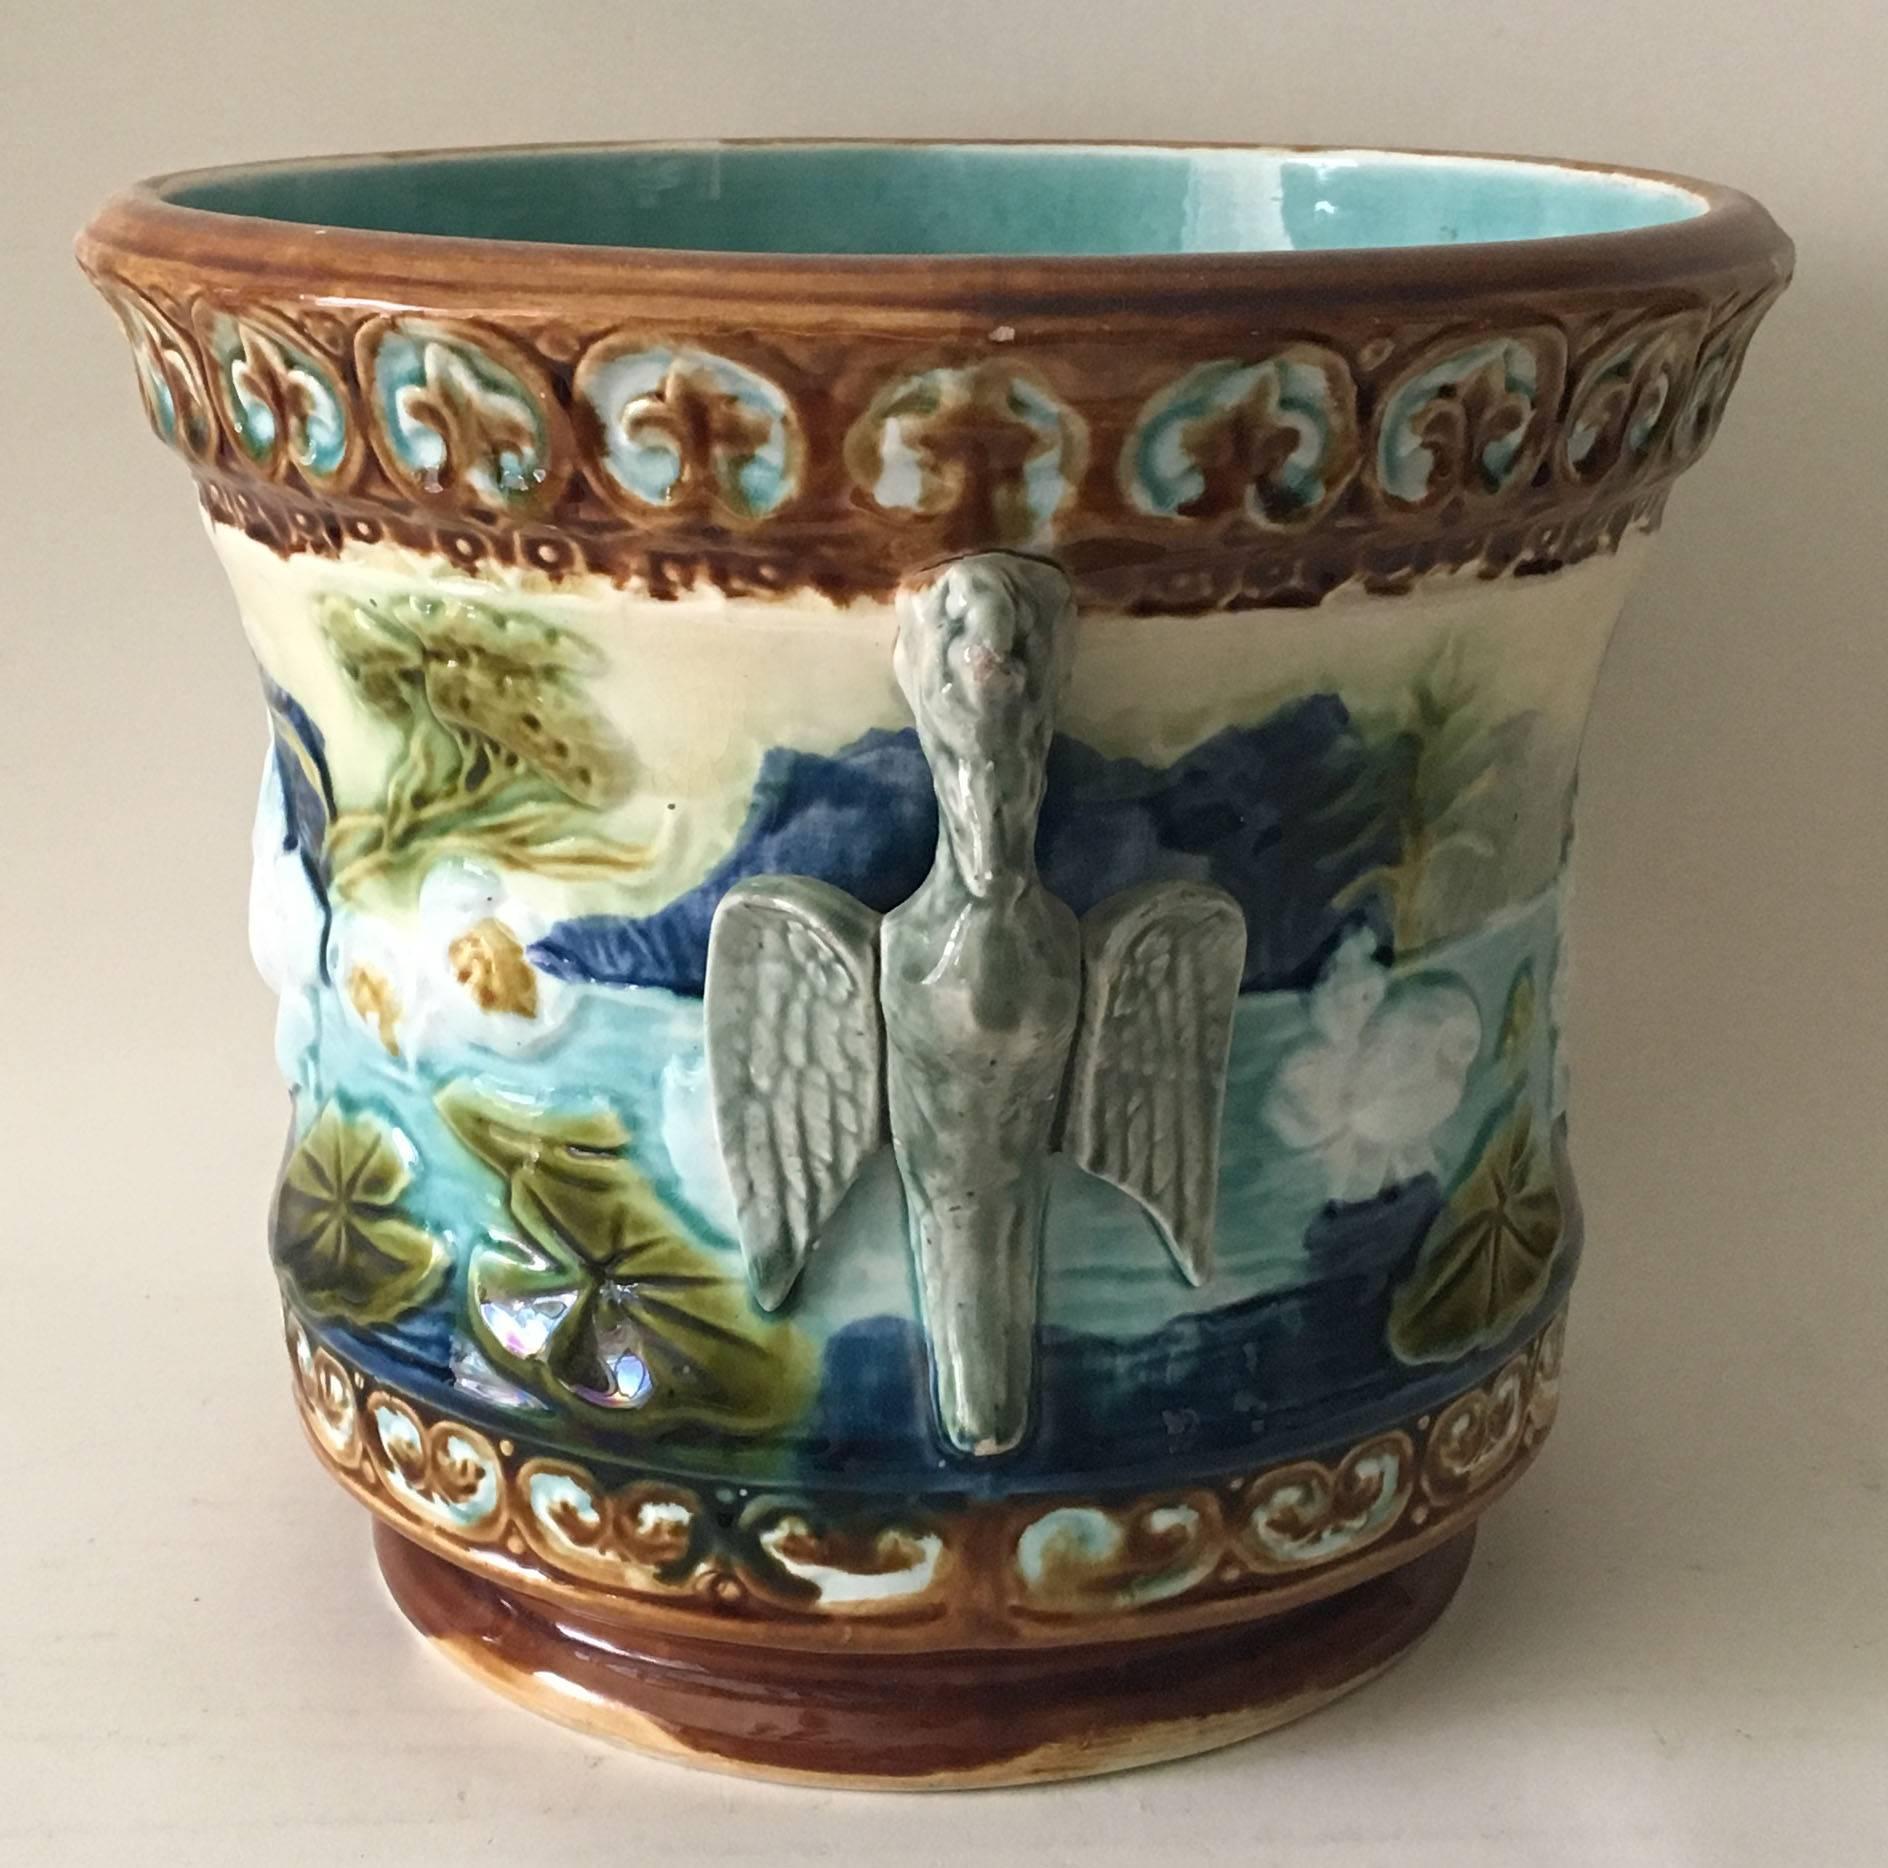 Antique Majolica water lily cache pot from North of France with birds handles, circa 1890.